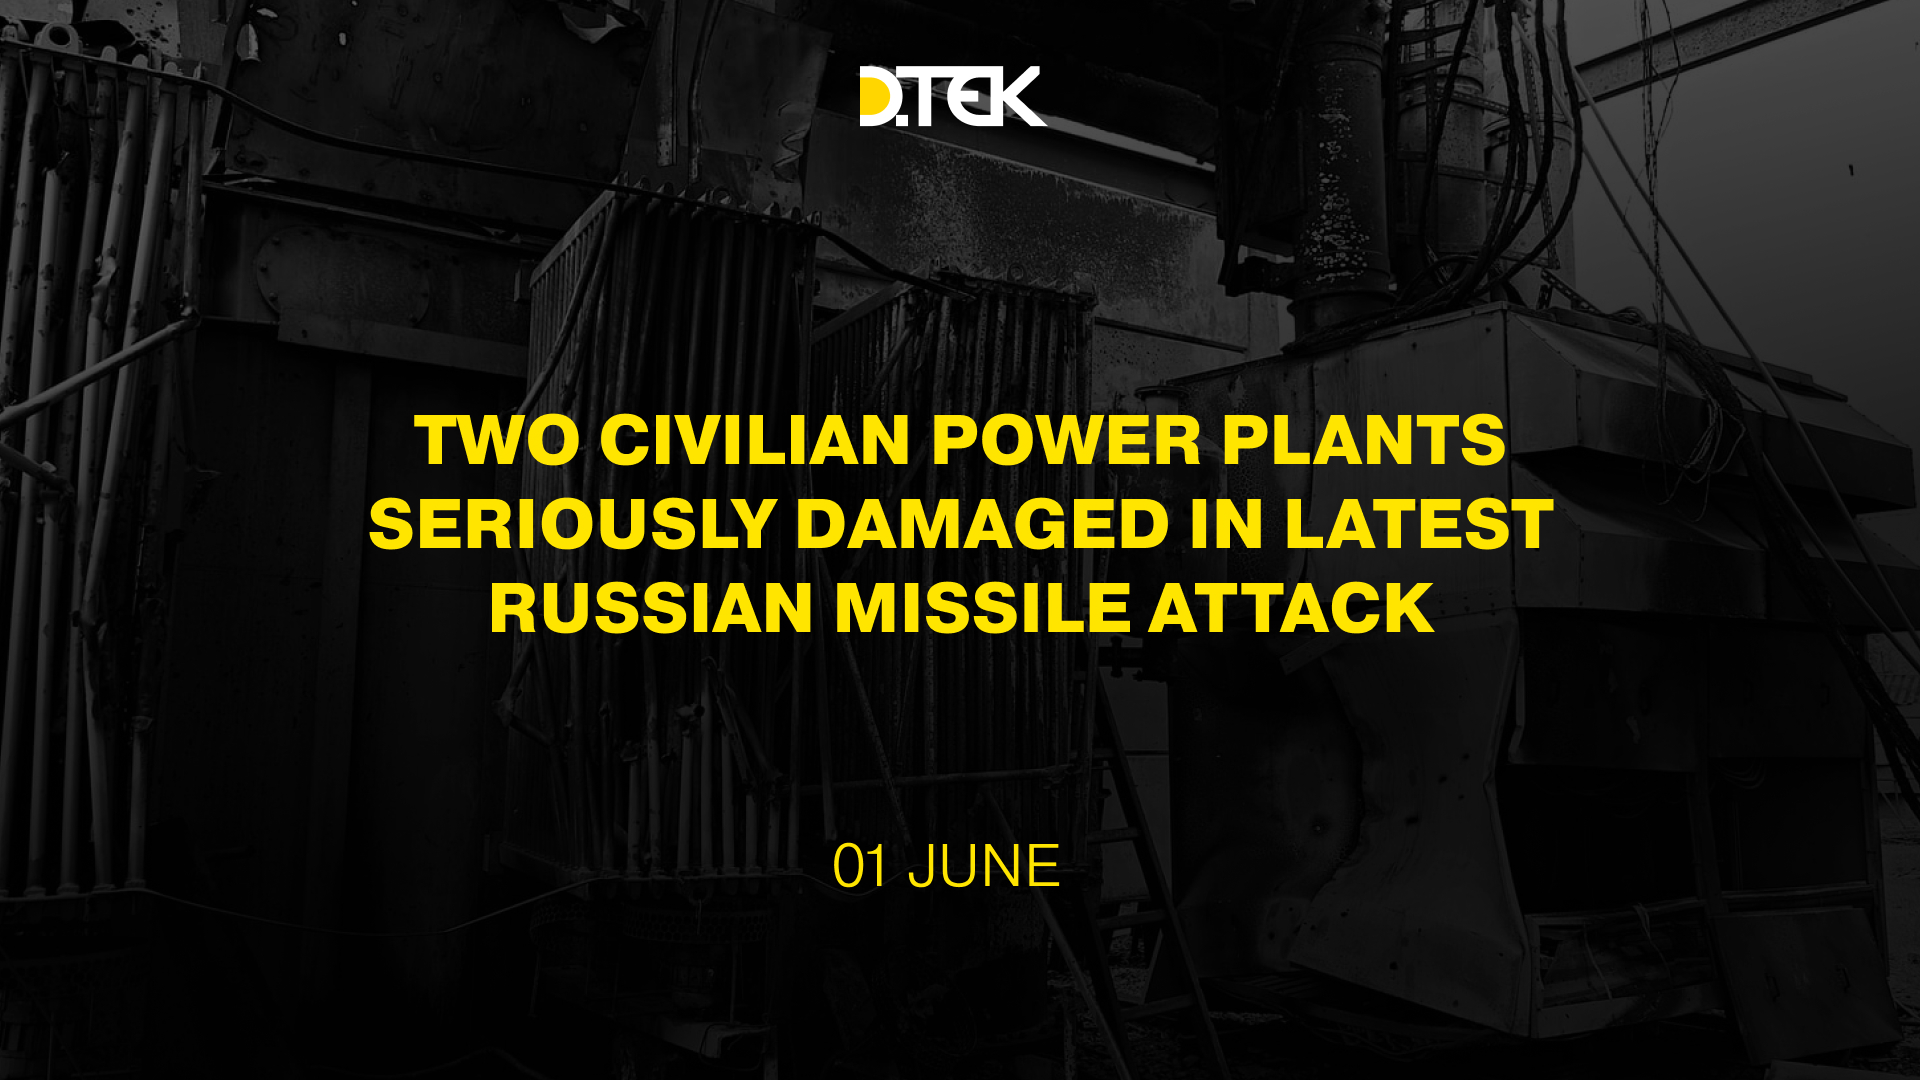 Two civilian power plants seriously damaged in latest russian missile attack